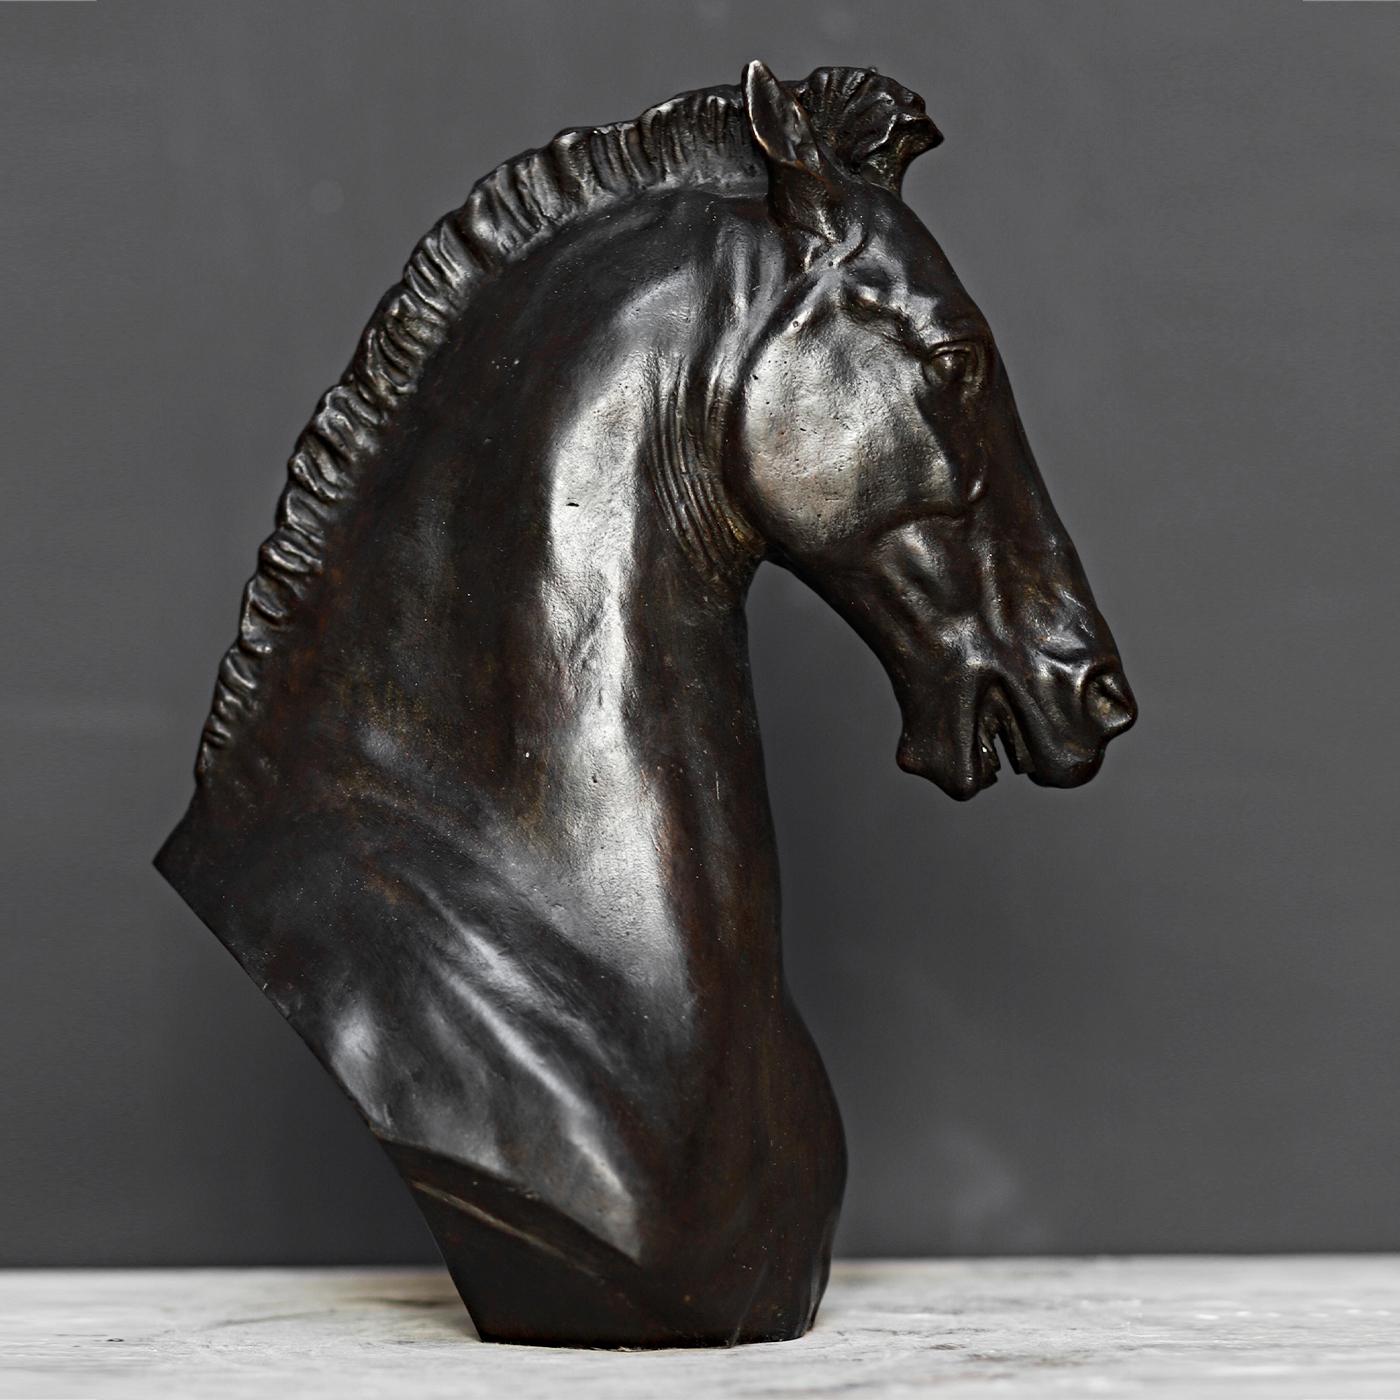 Symbol of strength and energy, this horse head sculpture combines ancient heritage with a modern sensibility. Rich in details, it showcases a deftly sculptured musculature and mane, entirely handcrafted of bronze with the lost wax technique. A